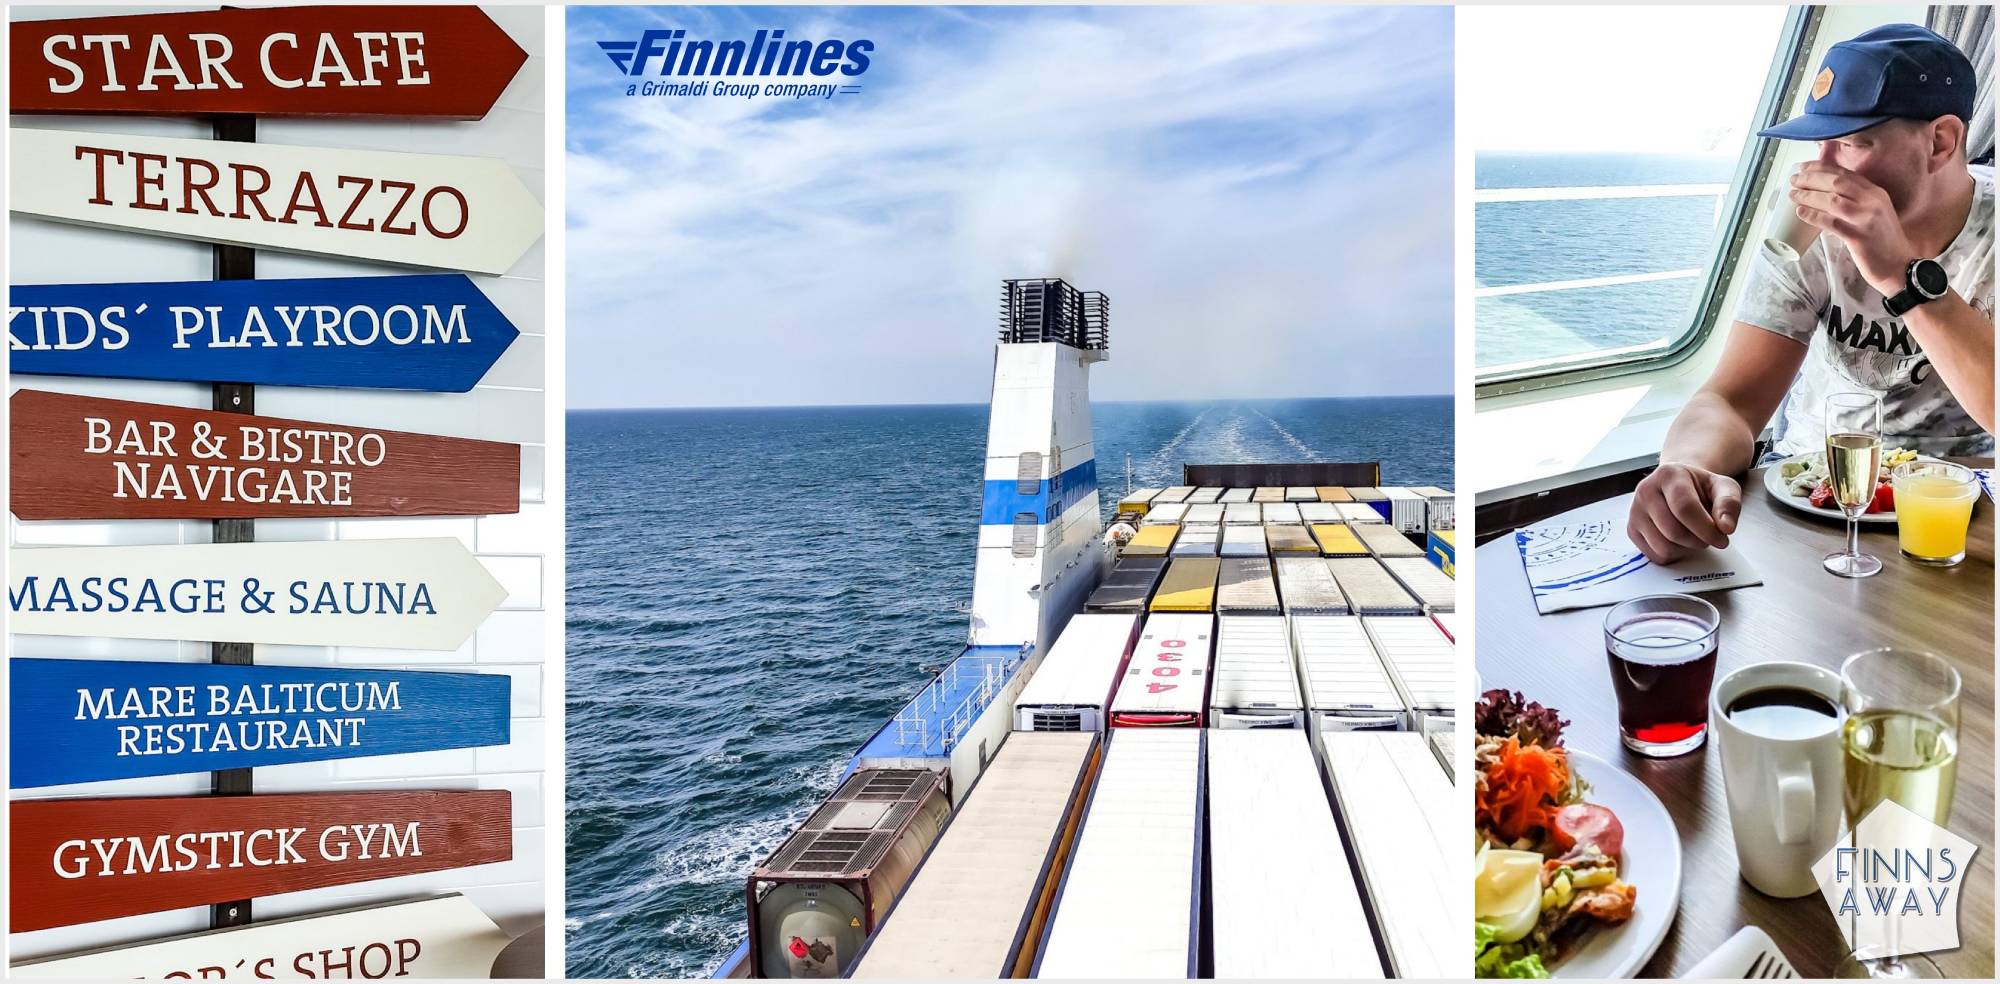 Crossing the Baltic Sea with Finnlines from Travemünde in Germany to Helsinki in Finland | FinnsAway Travel Blog